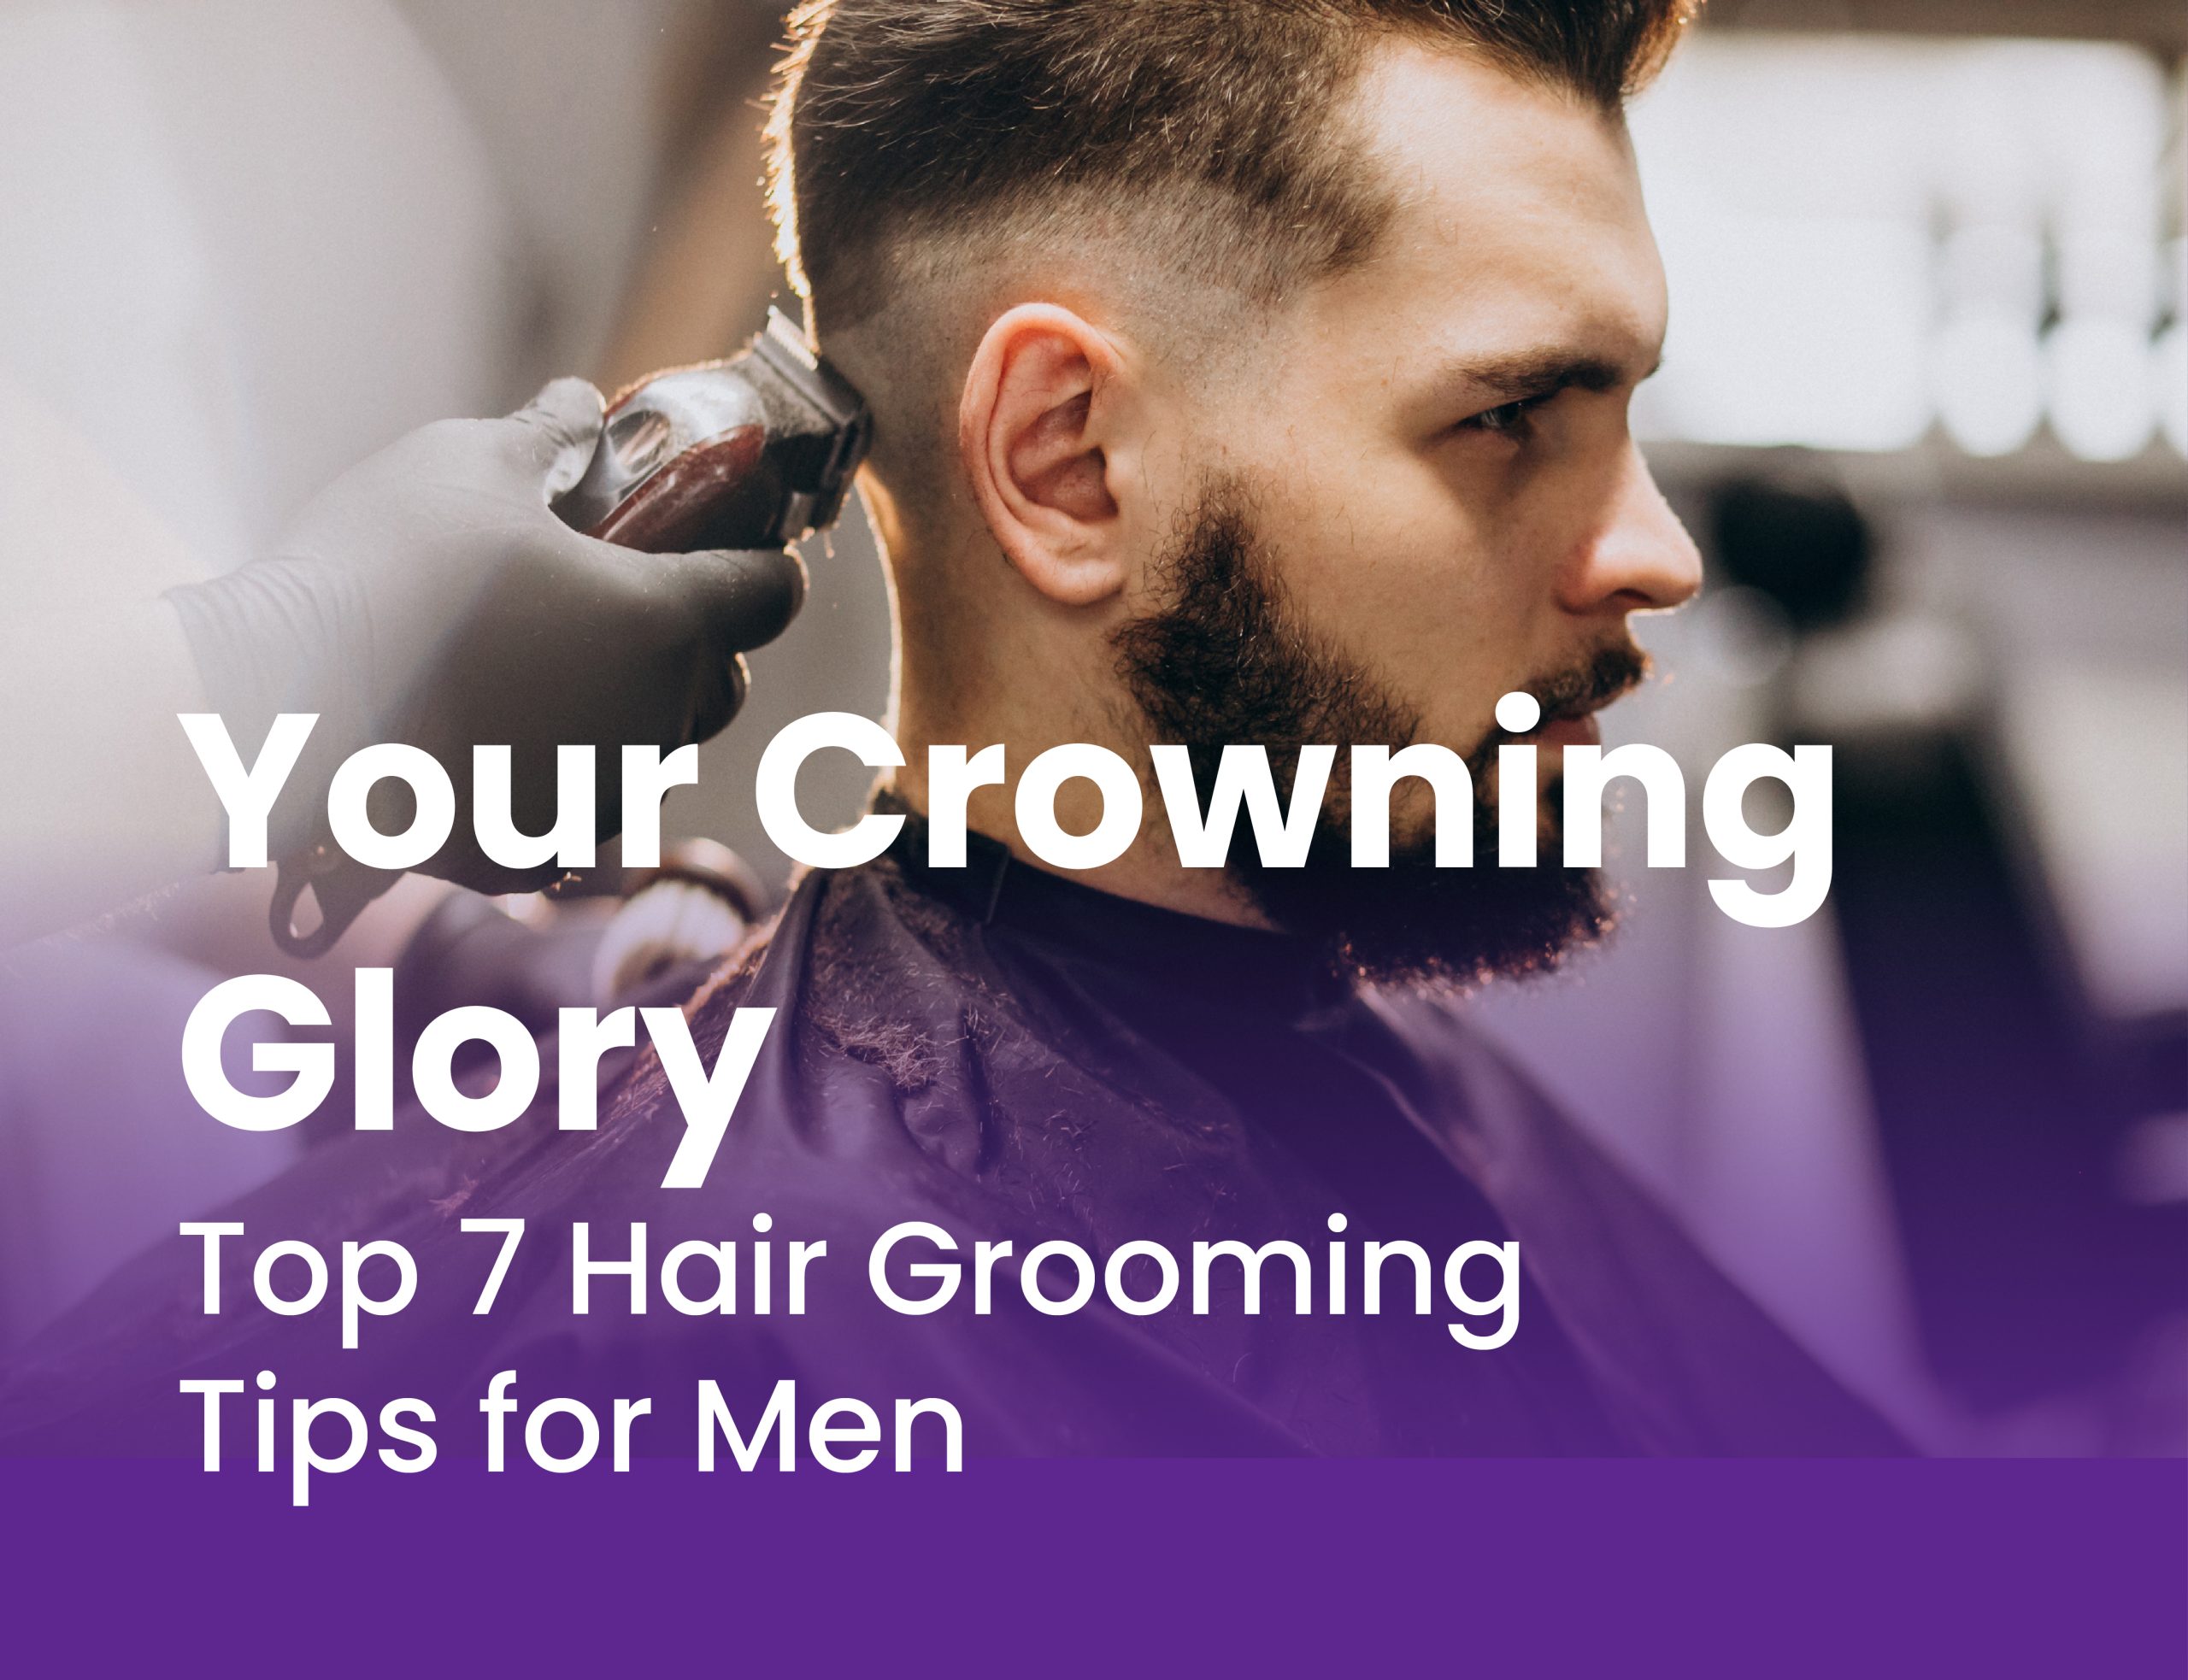 Your Crowning Glory - Top 7 Hair Grooming Tips For Men